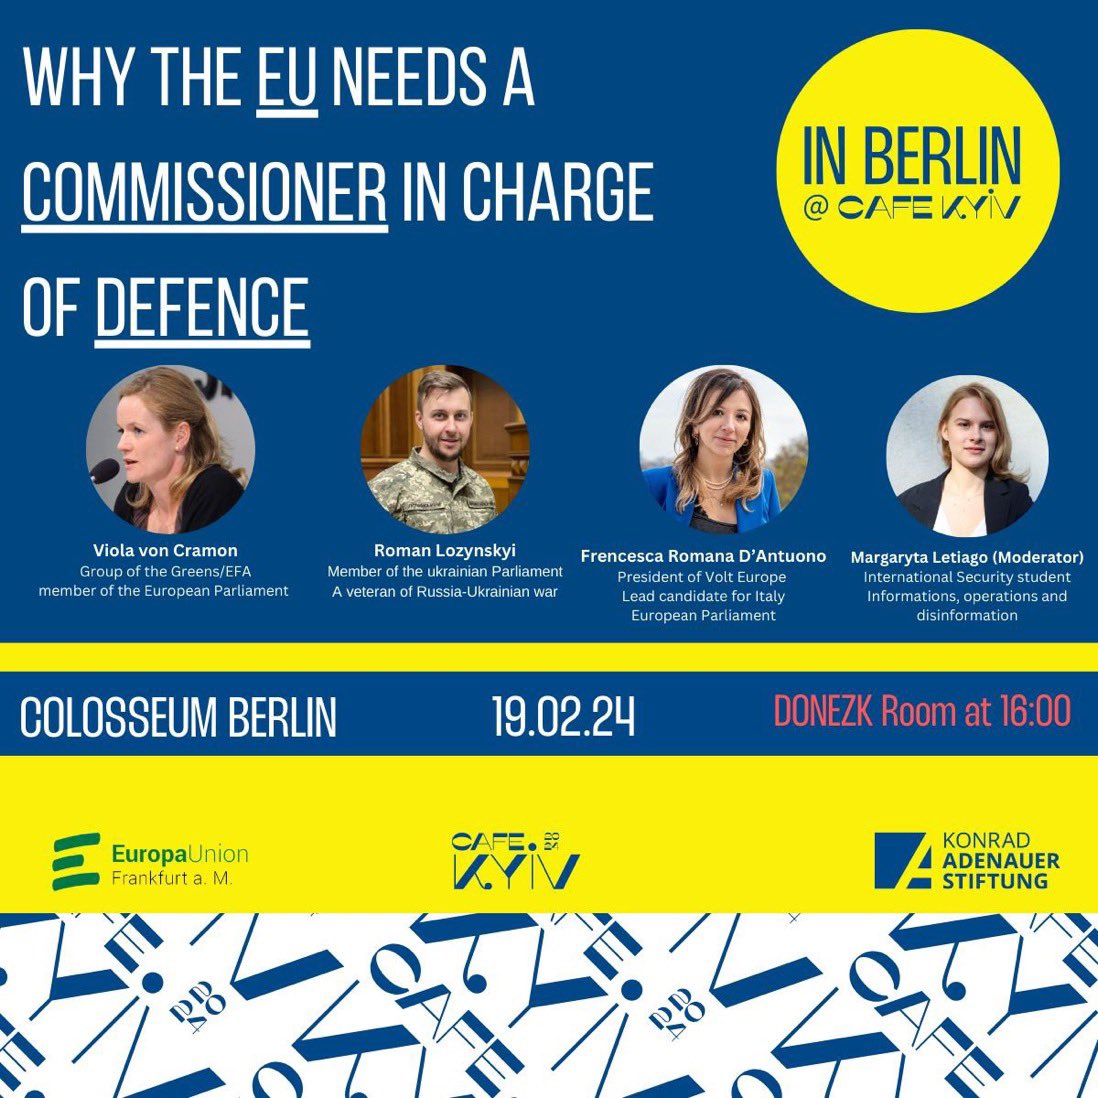 🟢🇪🇺At this year’s #CafeKyiv @EUFrankfurt_ discusses 'Why #Europe needs a Commissioner in charge of Defence' with
- @ViolavonCramon MEP 
- Roman Lozynskyi MP 🇺🇦
- @FRDantuono, President Volt 🇪🇺
Moderator: Margaryta Letiago
#EUvalues #democracy #EUCivilSociety #Ukraine #EurHope